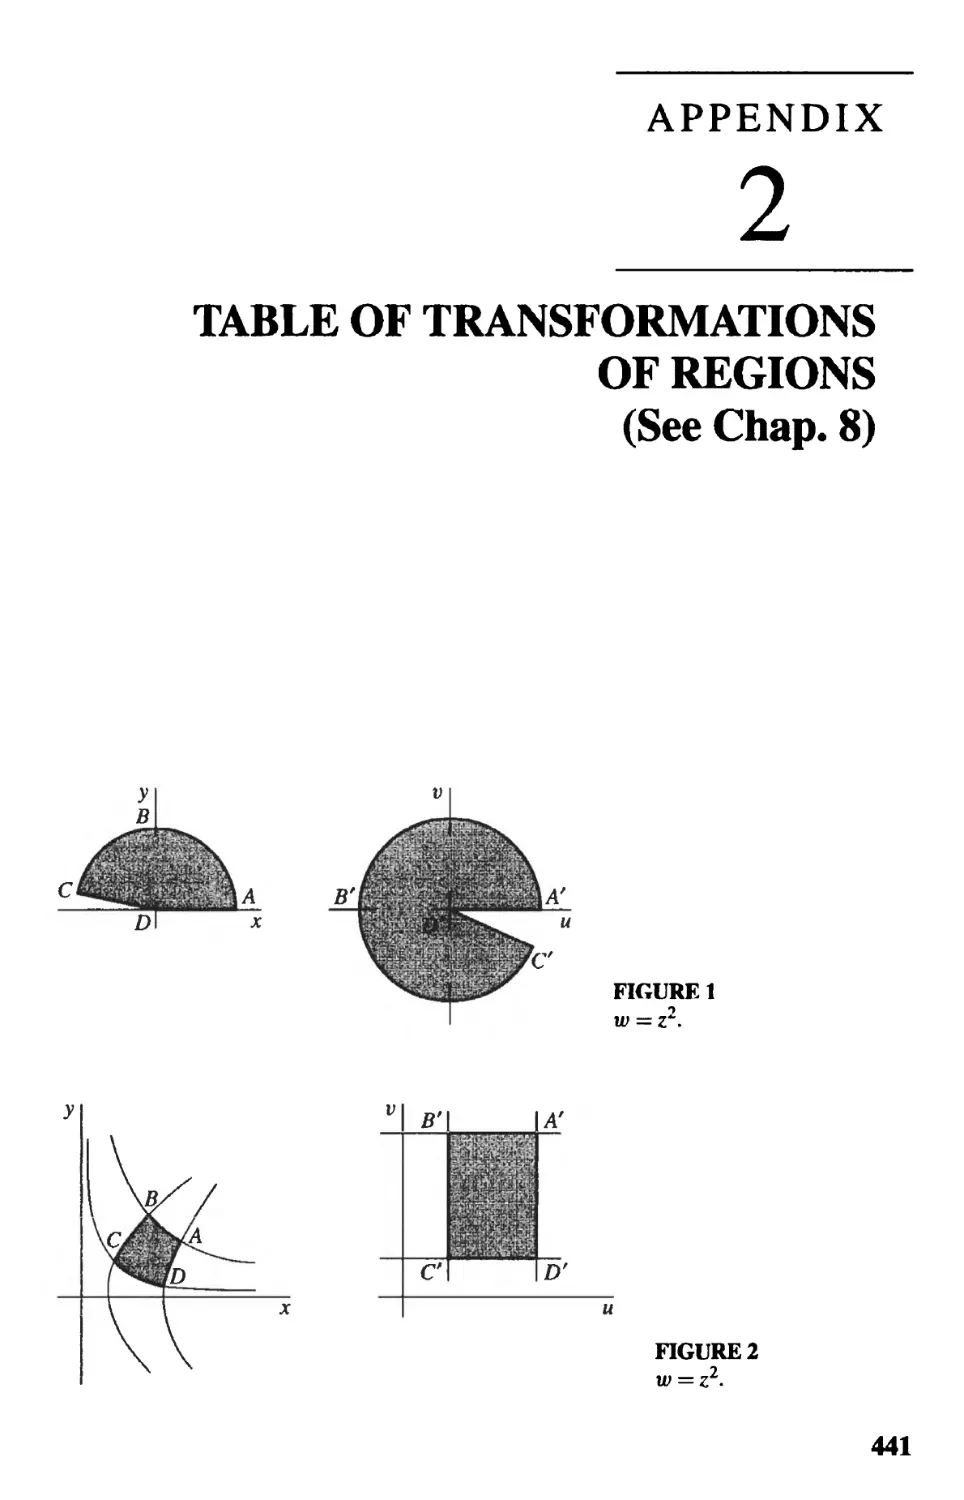 Table of Transformations of Regions